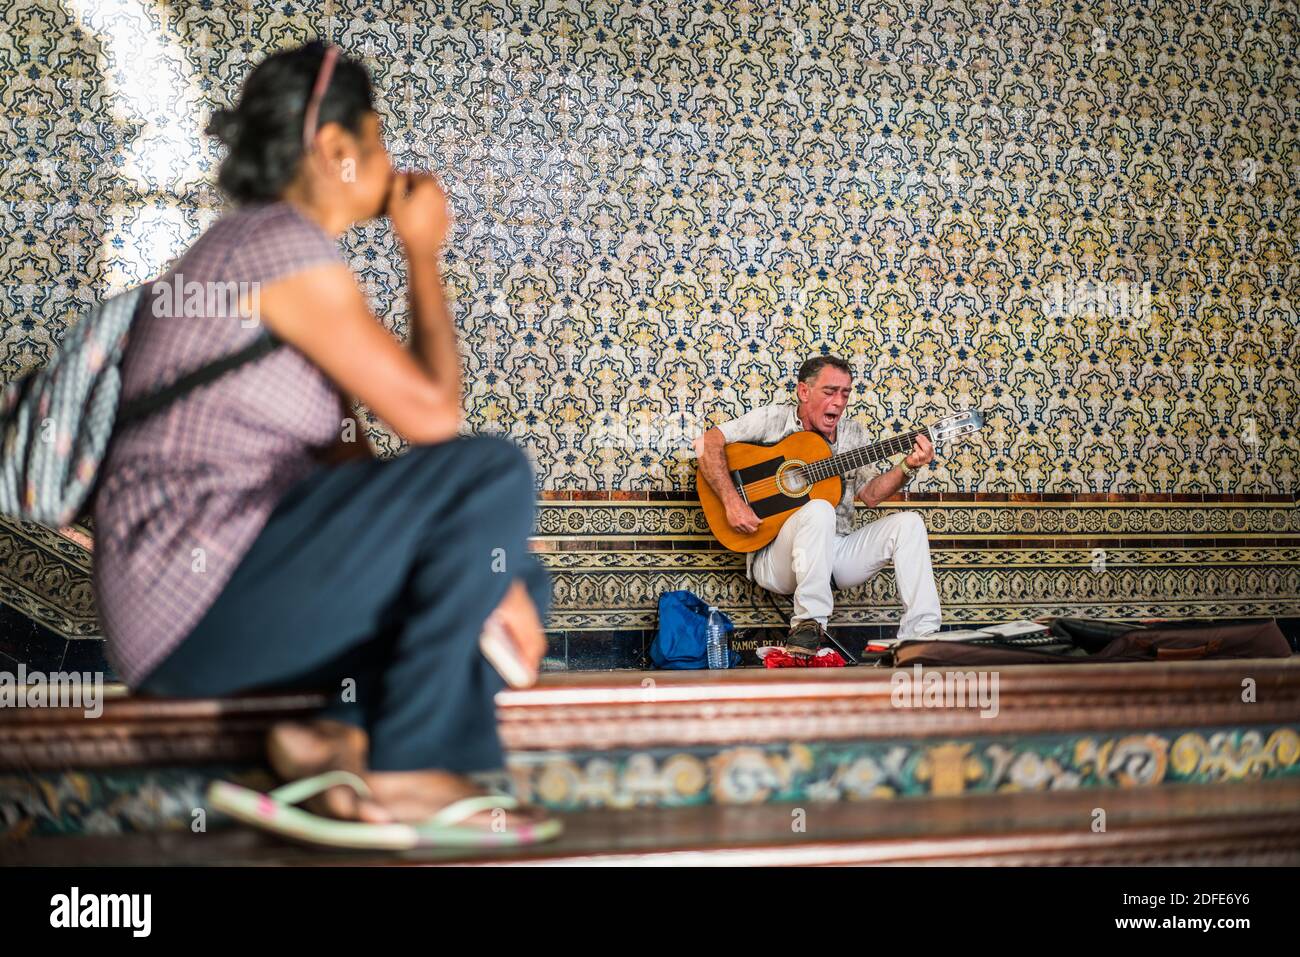 guitar player in the Spanish square, Seville, Spain, Europe Stock Photo -  Alamy